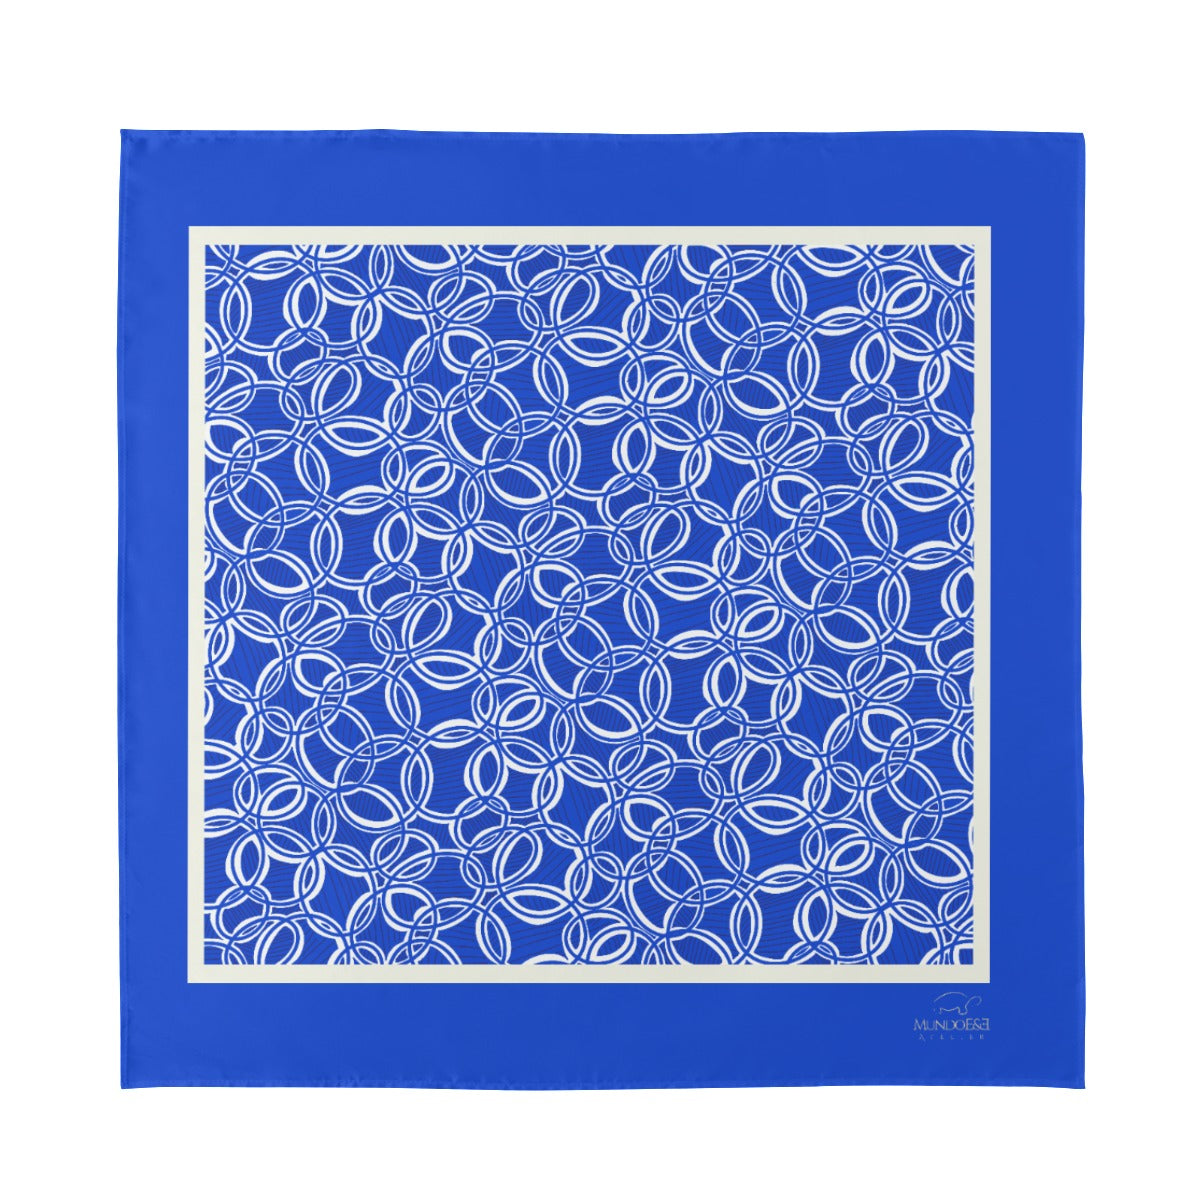 Geometric Blue and White Silk Scarf. Design hand-painted by the Designer Maria Alejandra Echenique